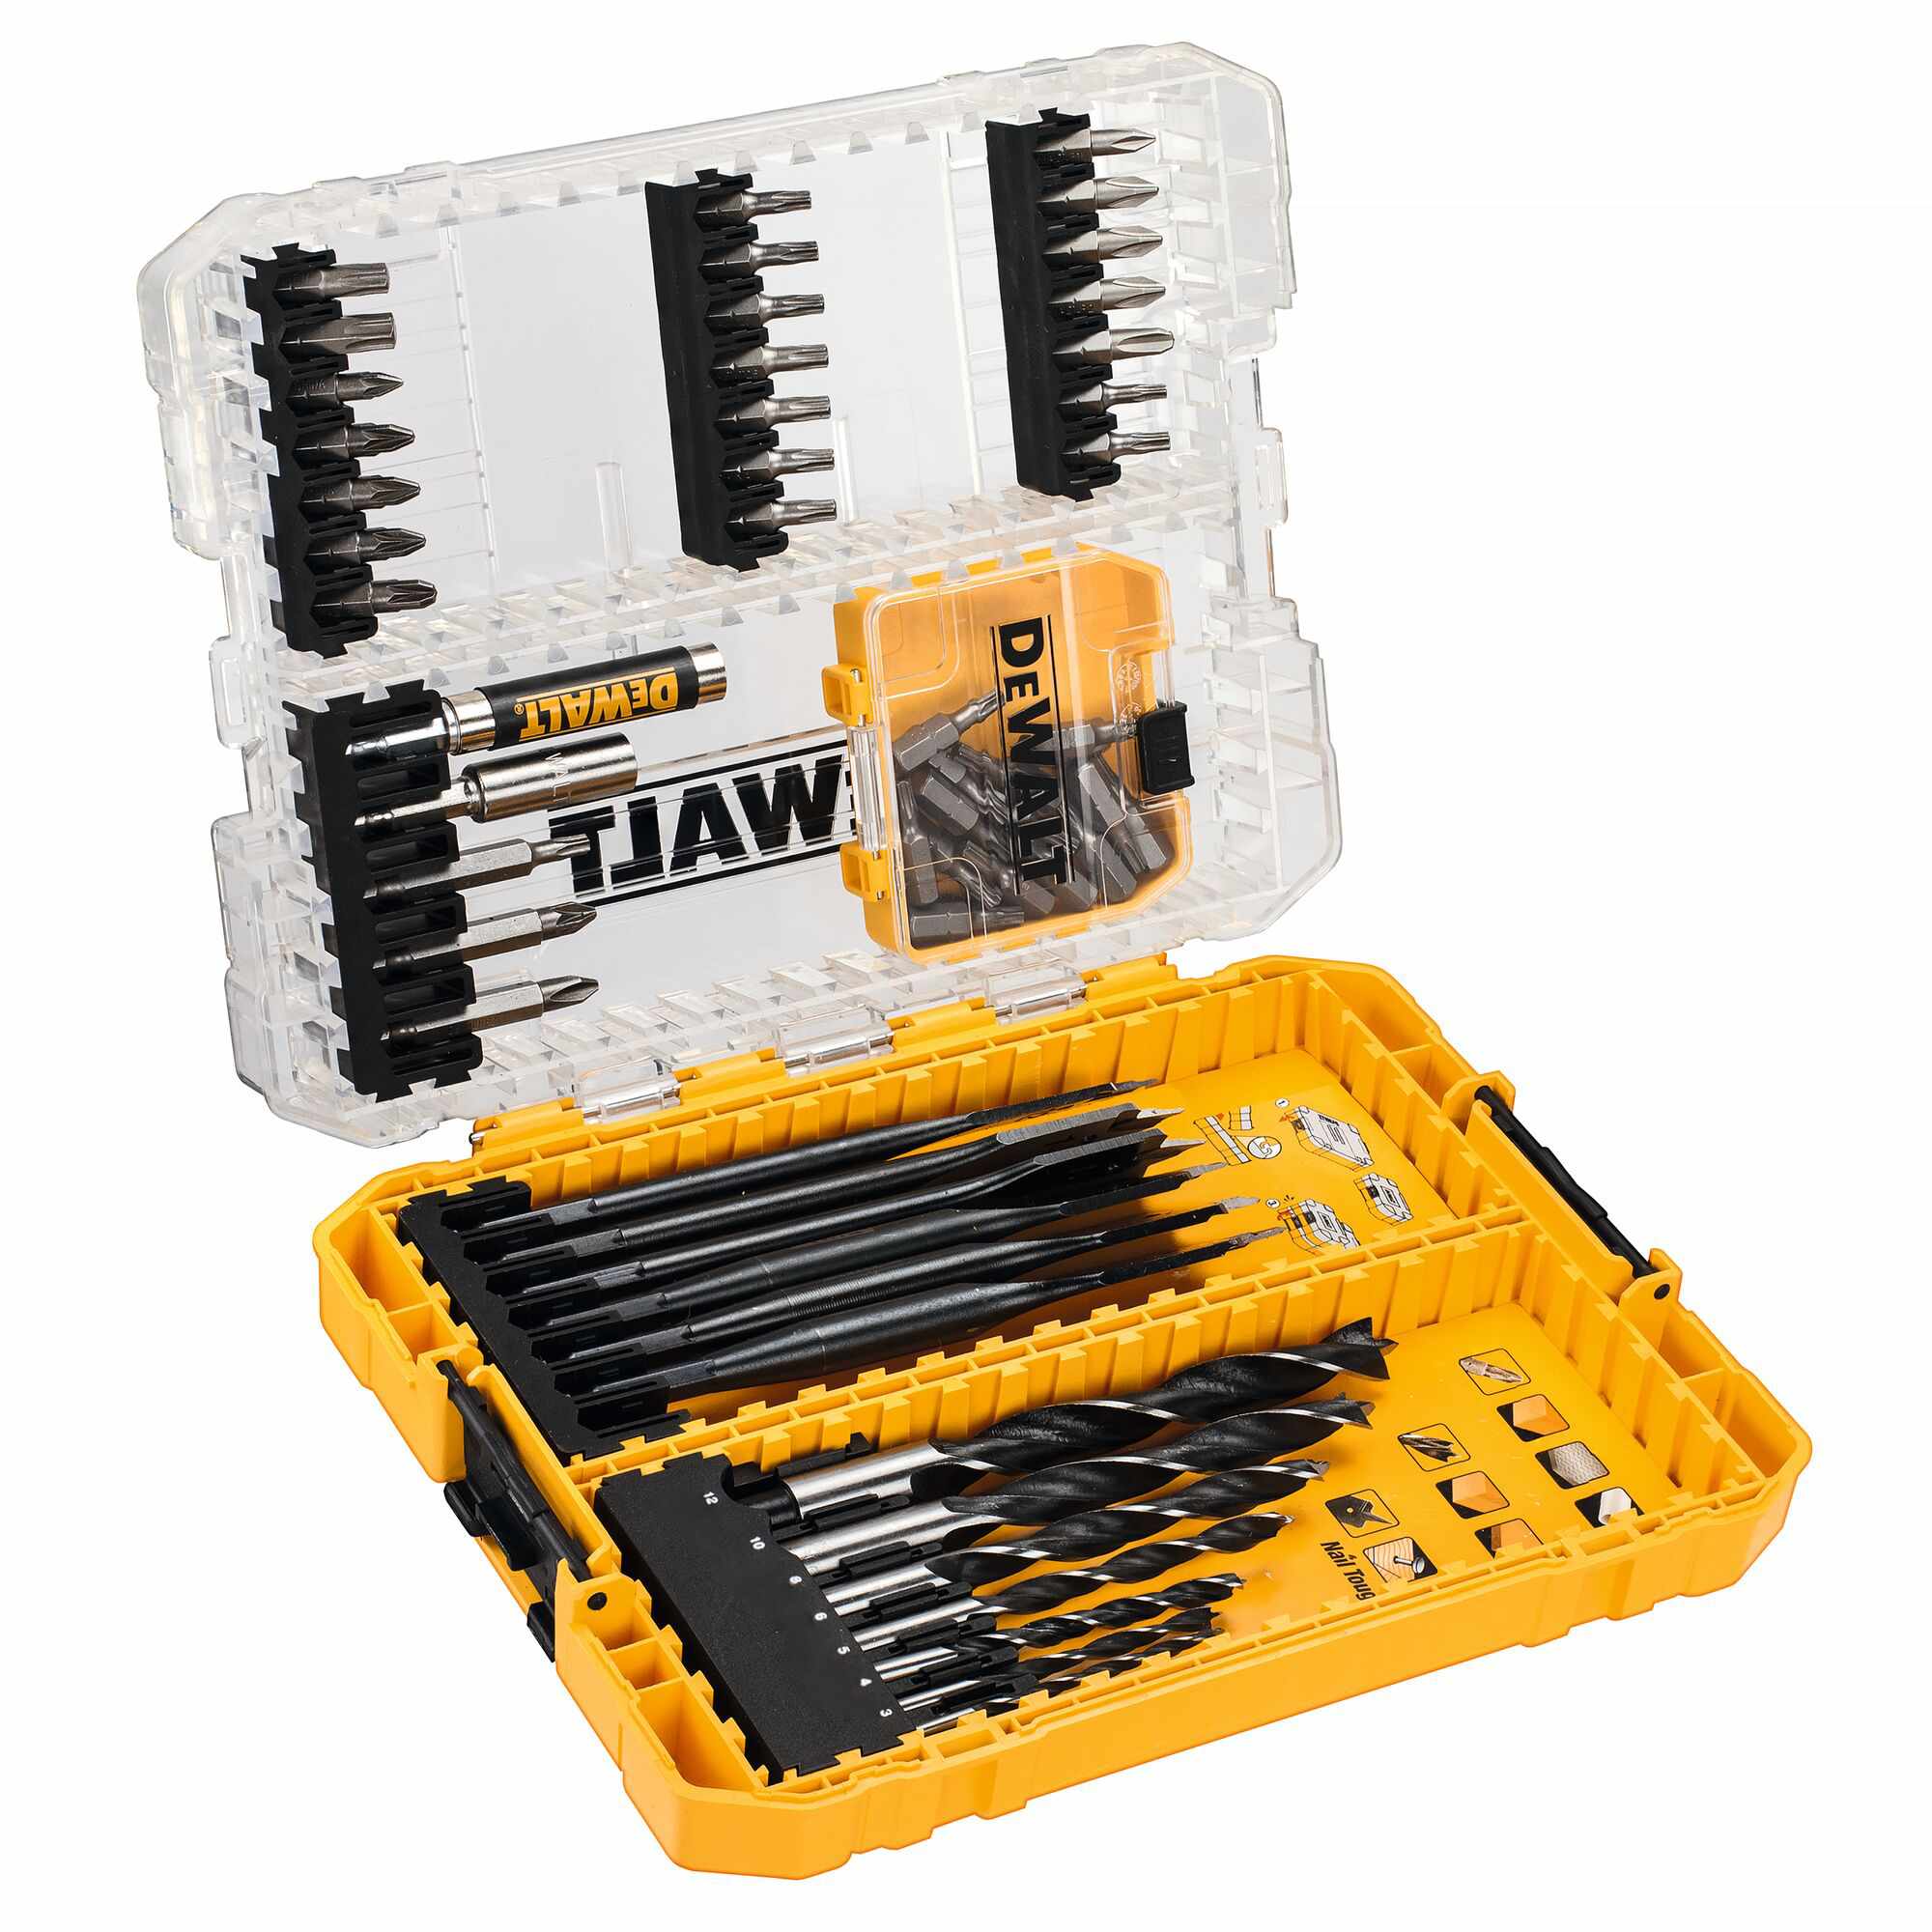 https://www.toolstoreuk.co.uk/images/products/large/20895_143747.jpg